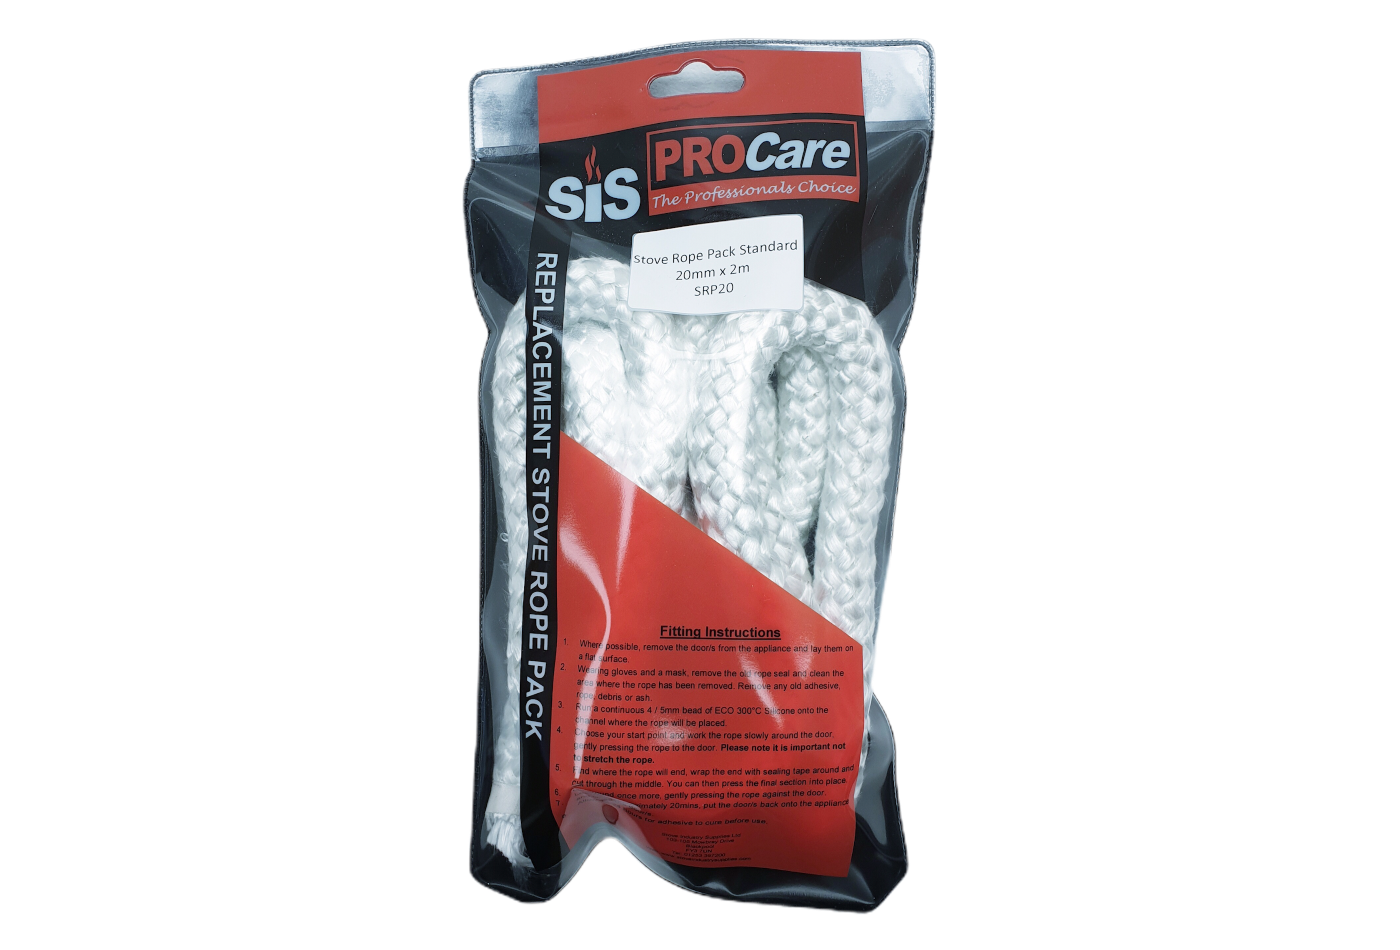 SiS Procare White 20 milimetre x 2 metre Standard Stove Rope Pack - product code SRP20